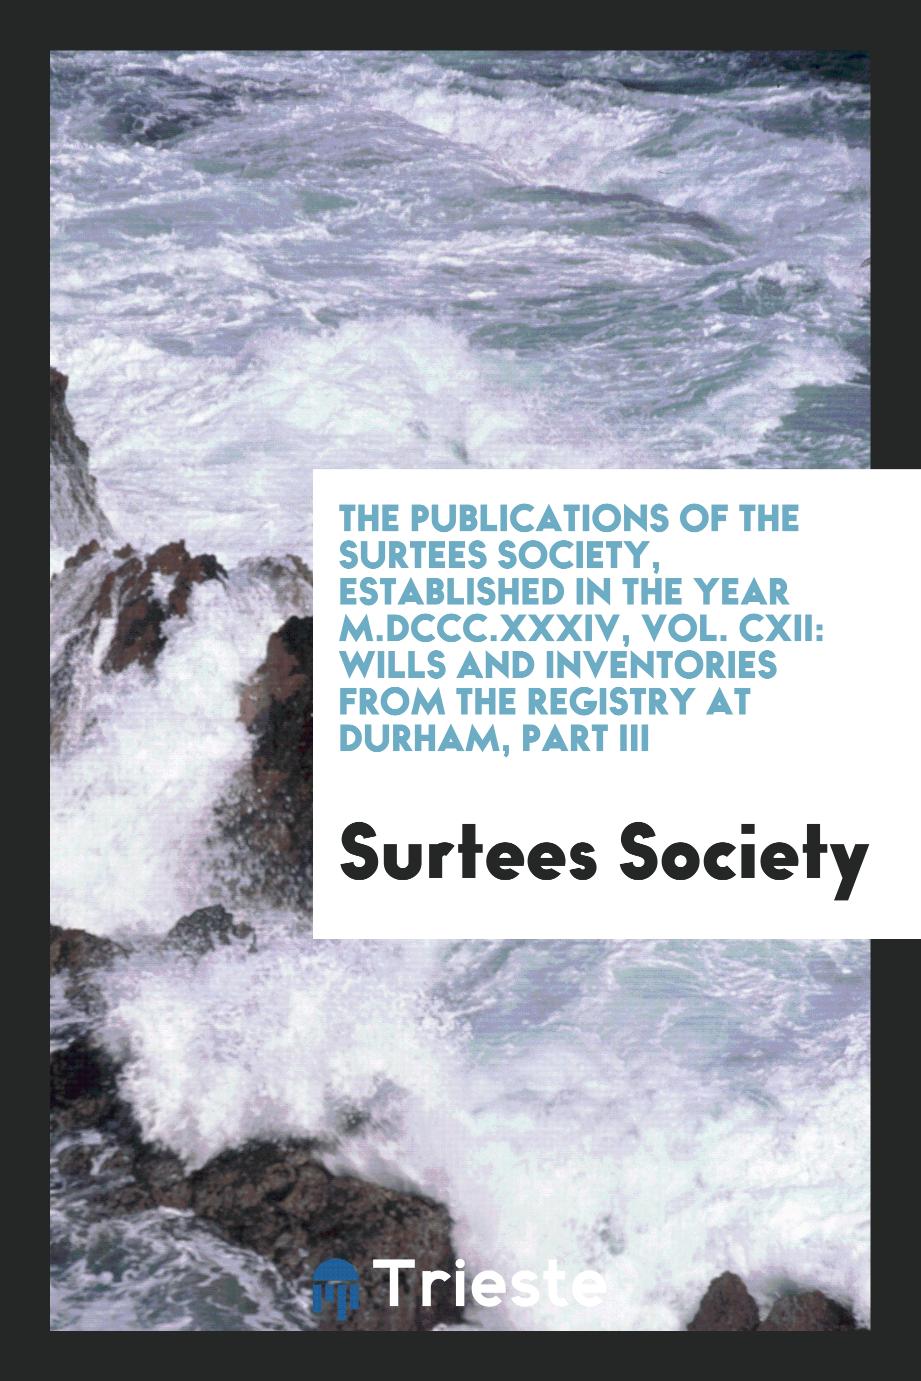 The Publications of the Surtees Society, Established in the Year M.DCCC.XXXIV, Vol. CXII: Wills and Inventories from the Registry at Durham, Part III